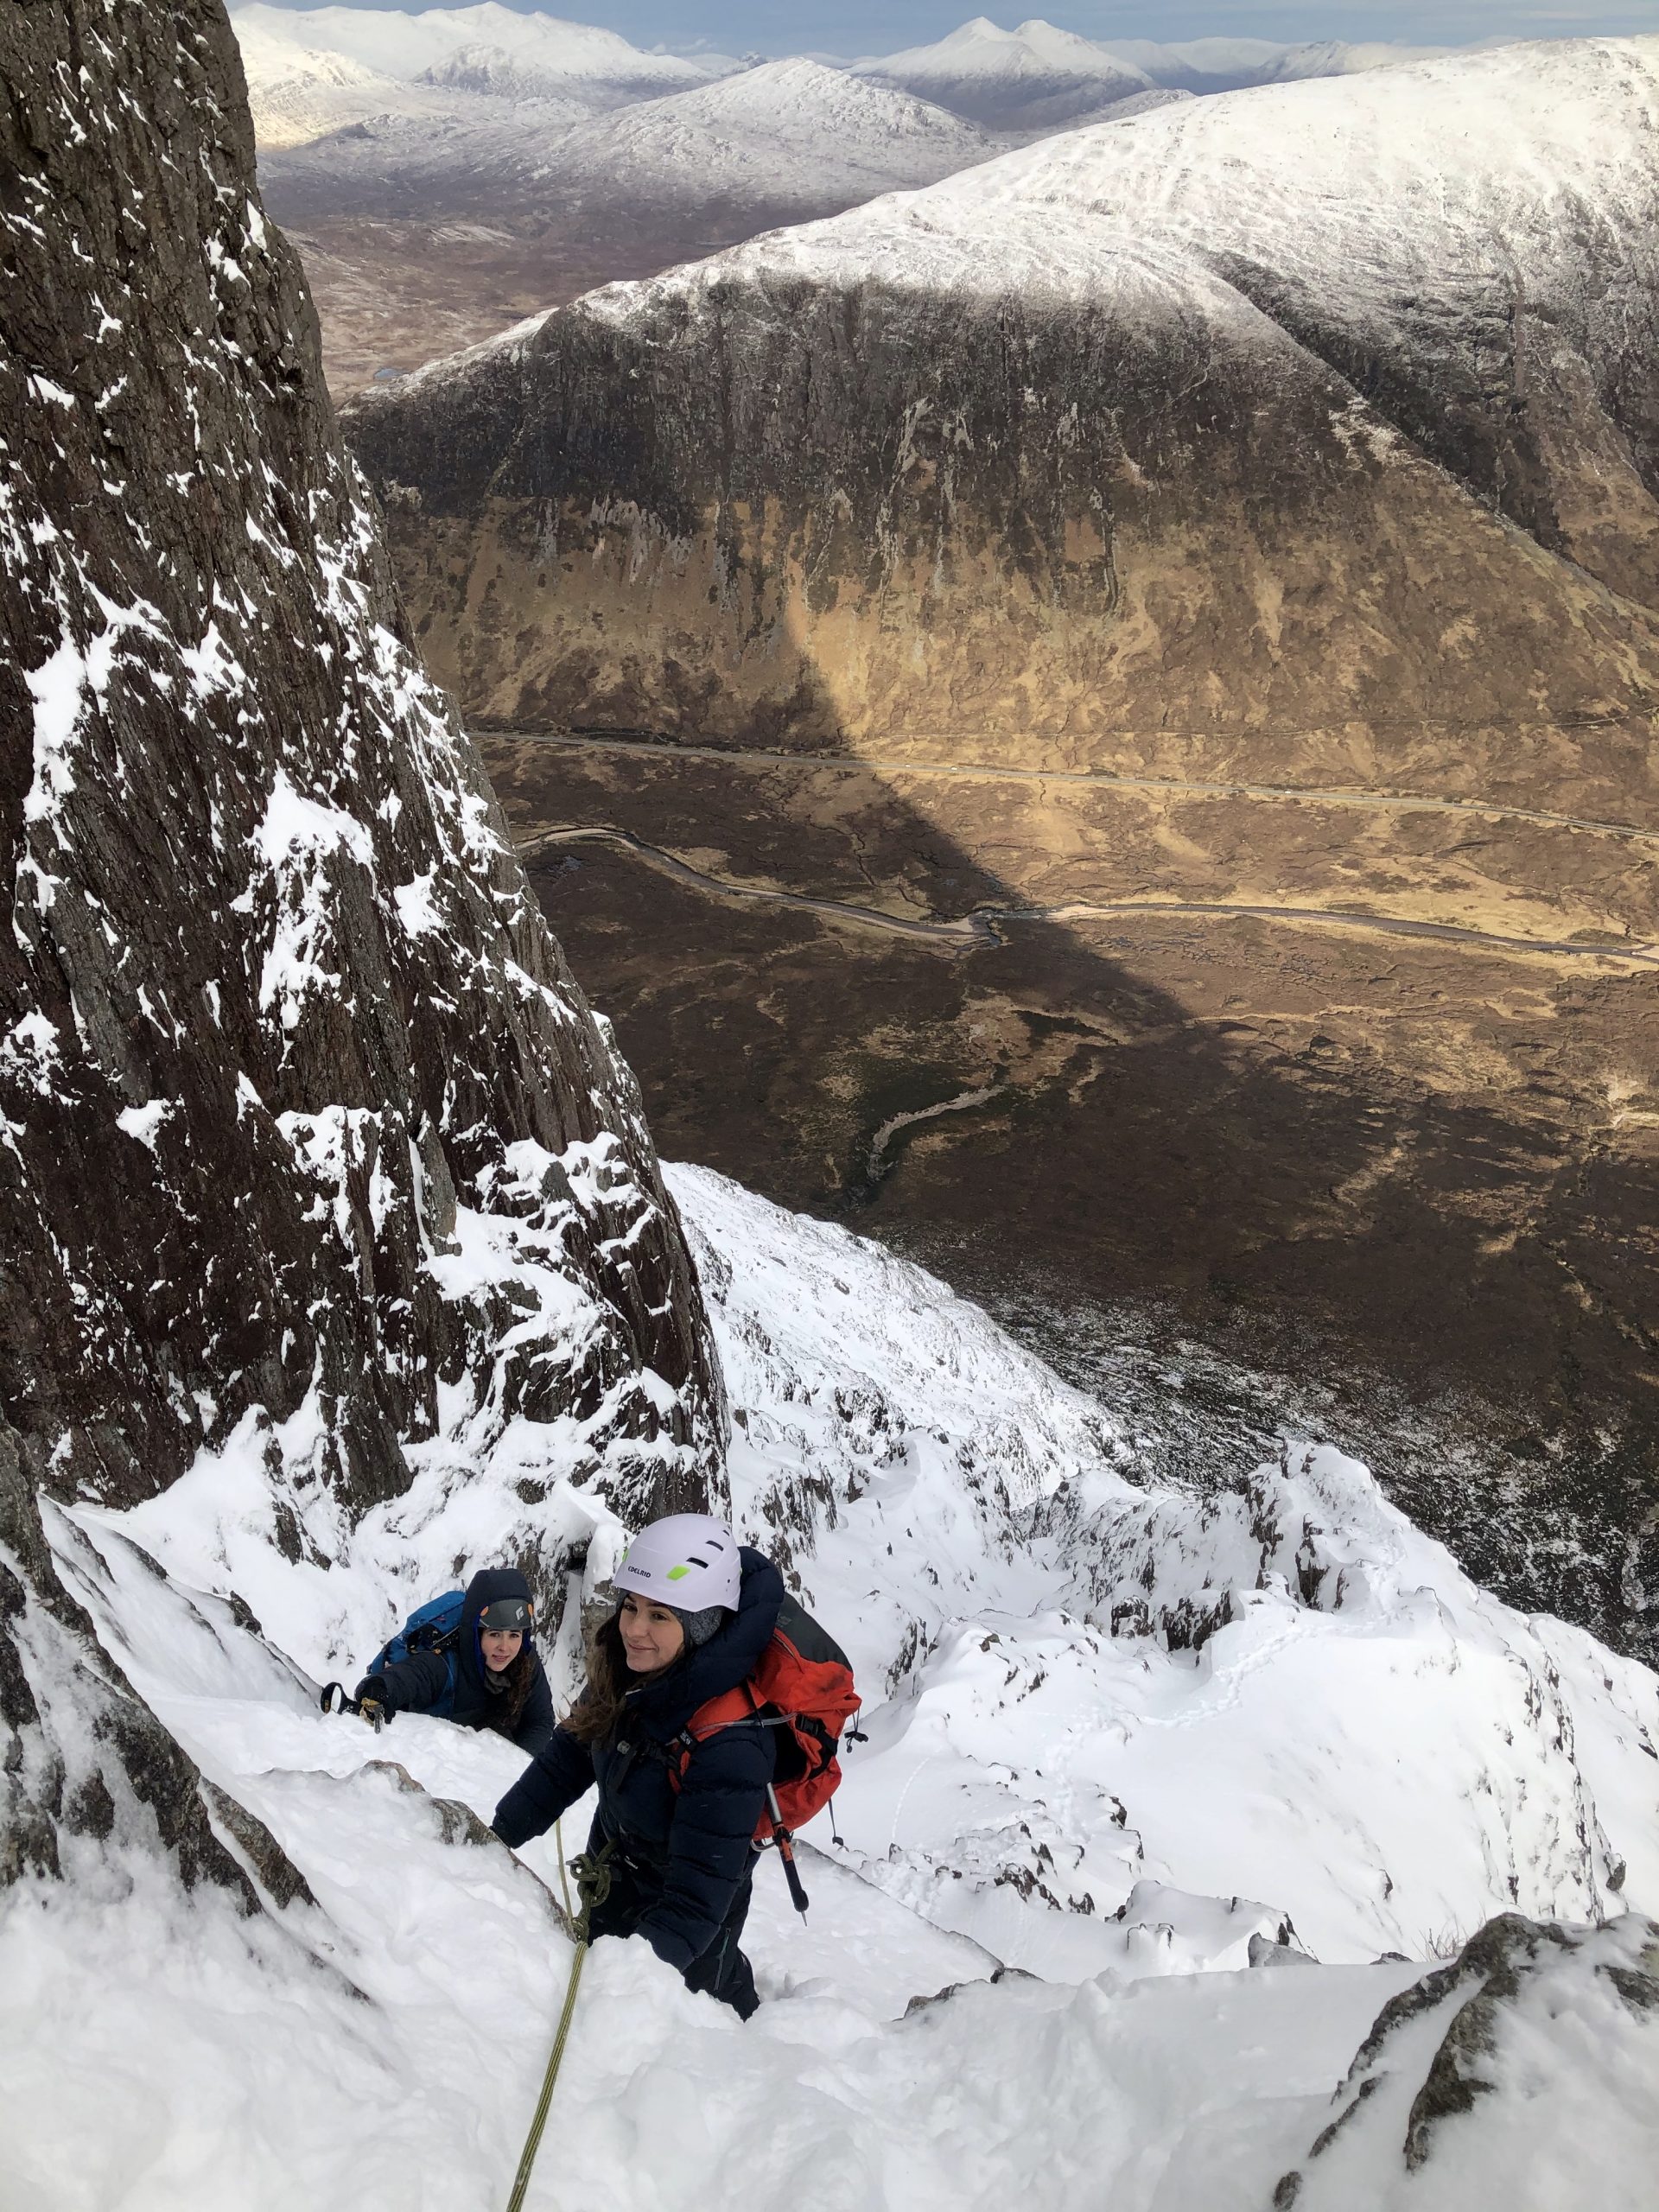 Two climbers making their way up Curved Ridge in Glencoe in full winter conditions